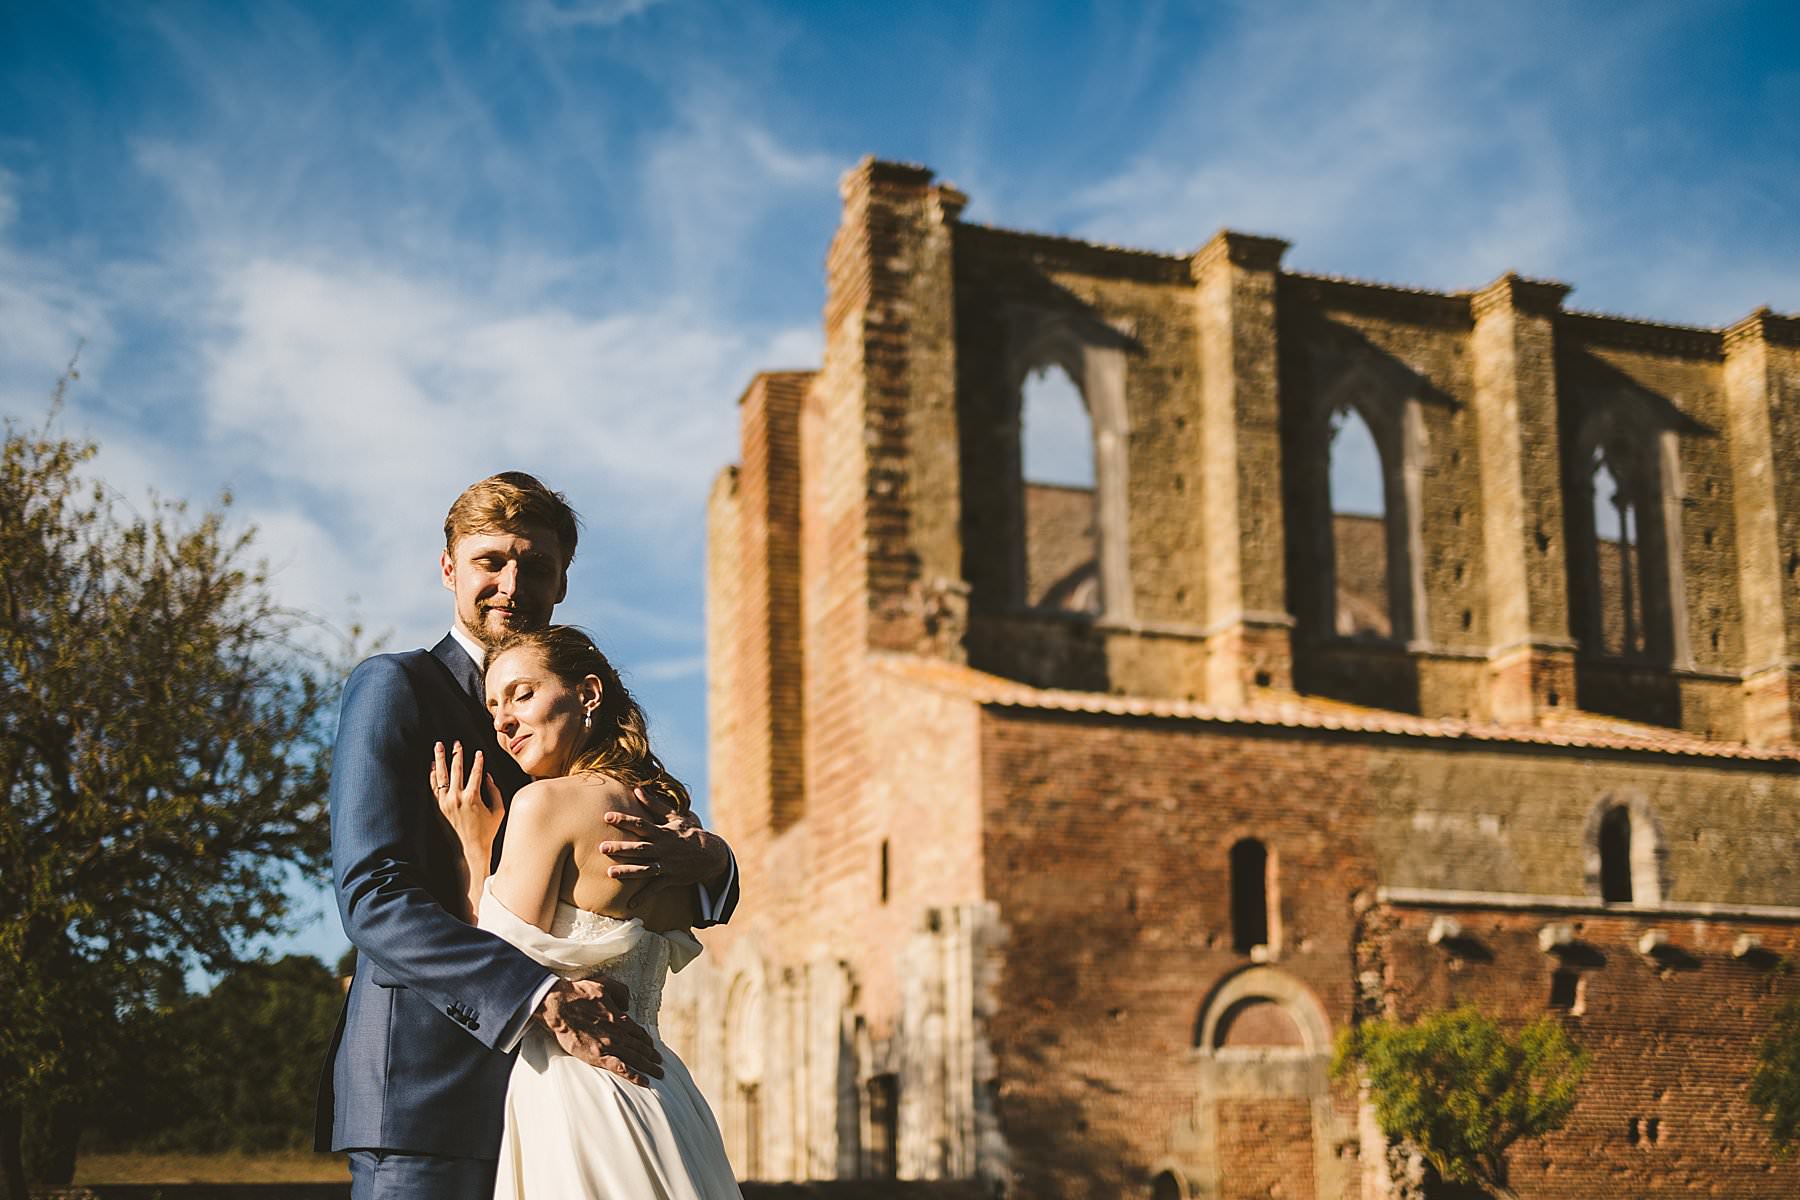 Romantic bride and groom wedding photo in the countryside of Tuscany wedding at Roofless Abbey of San Galgano